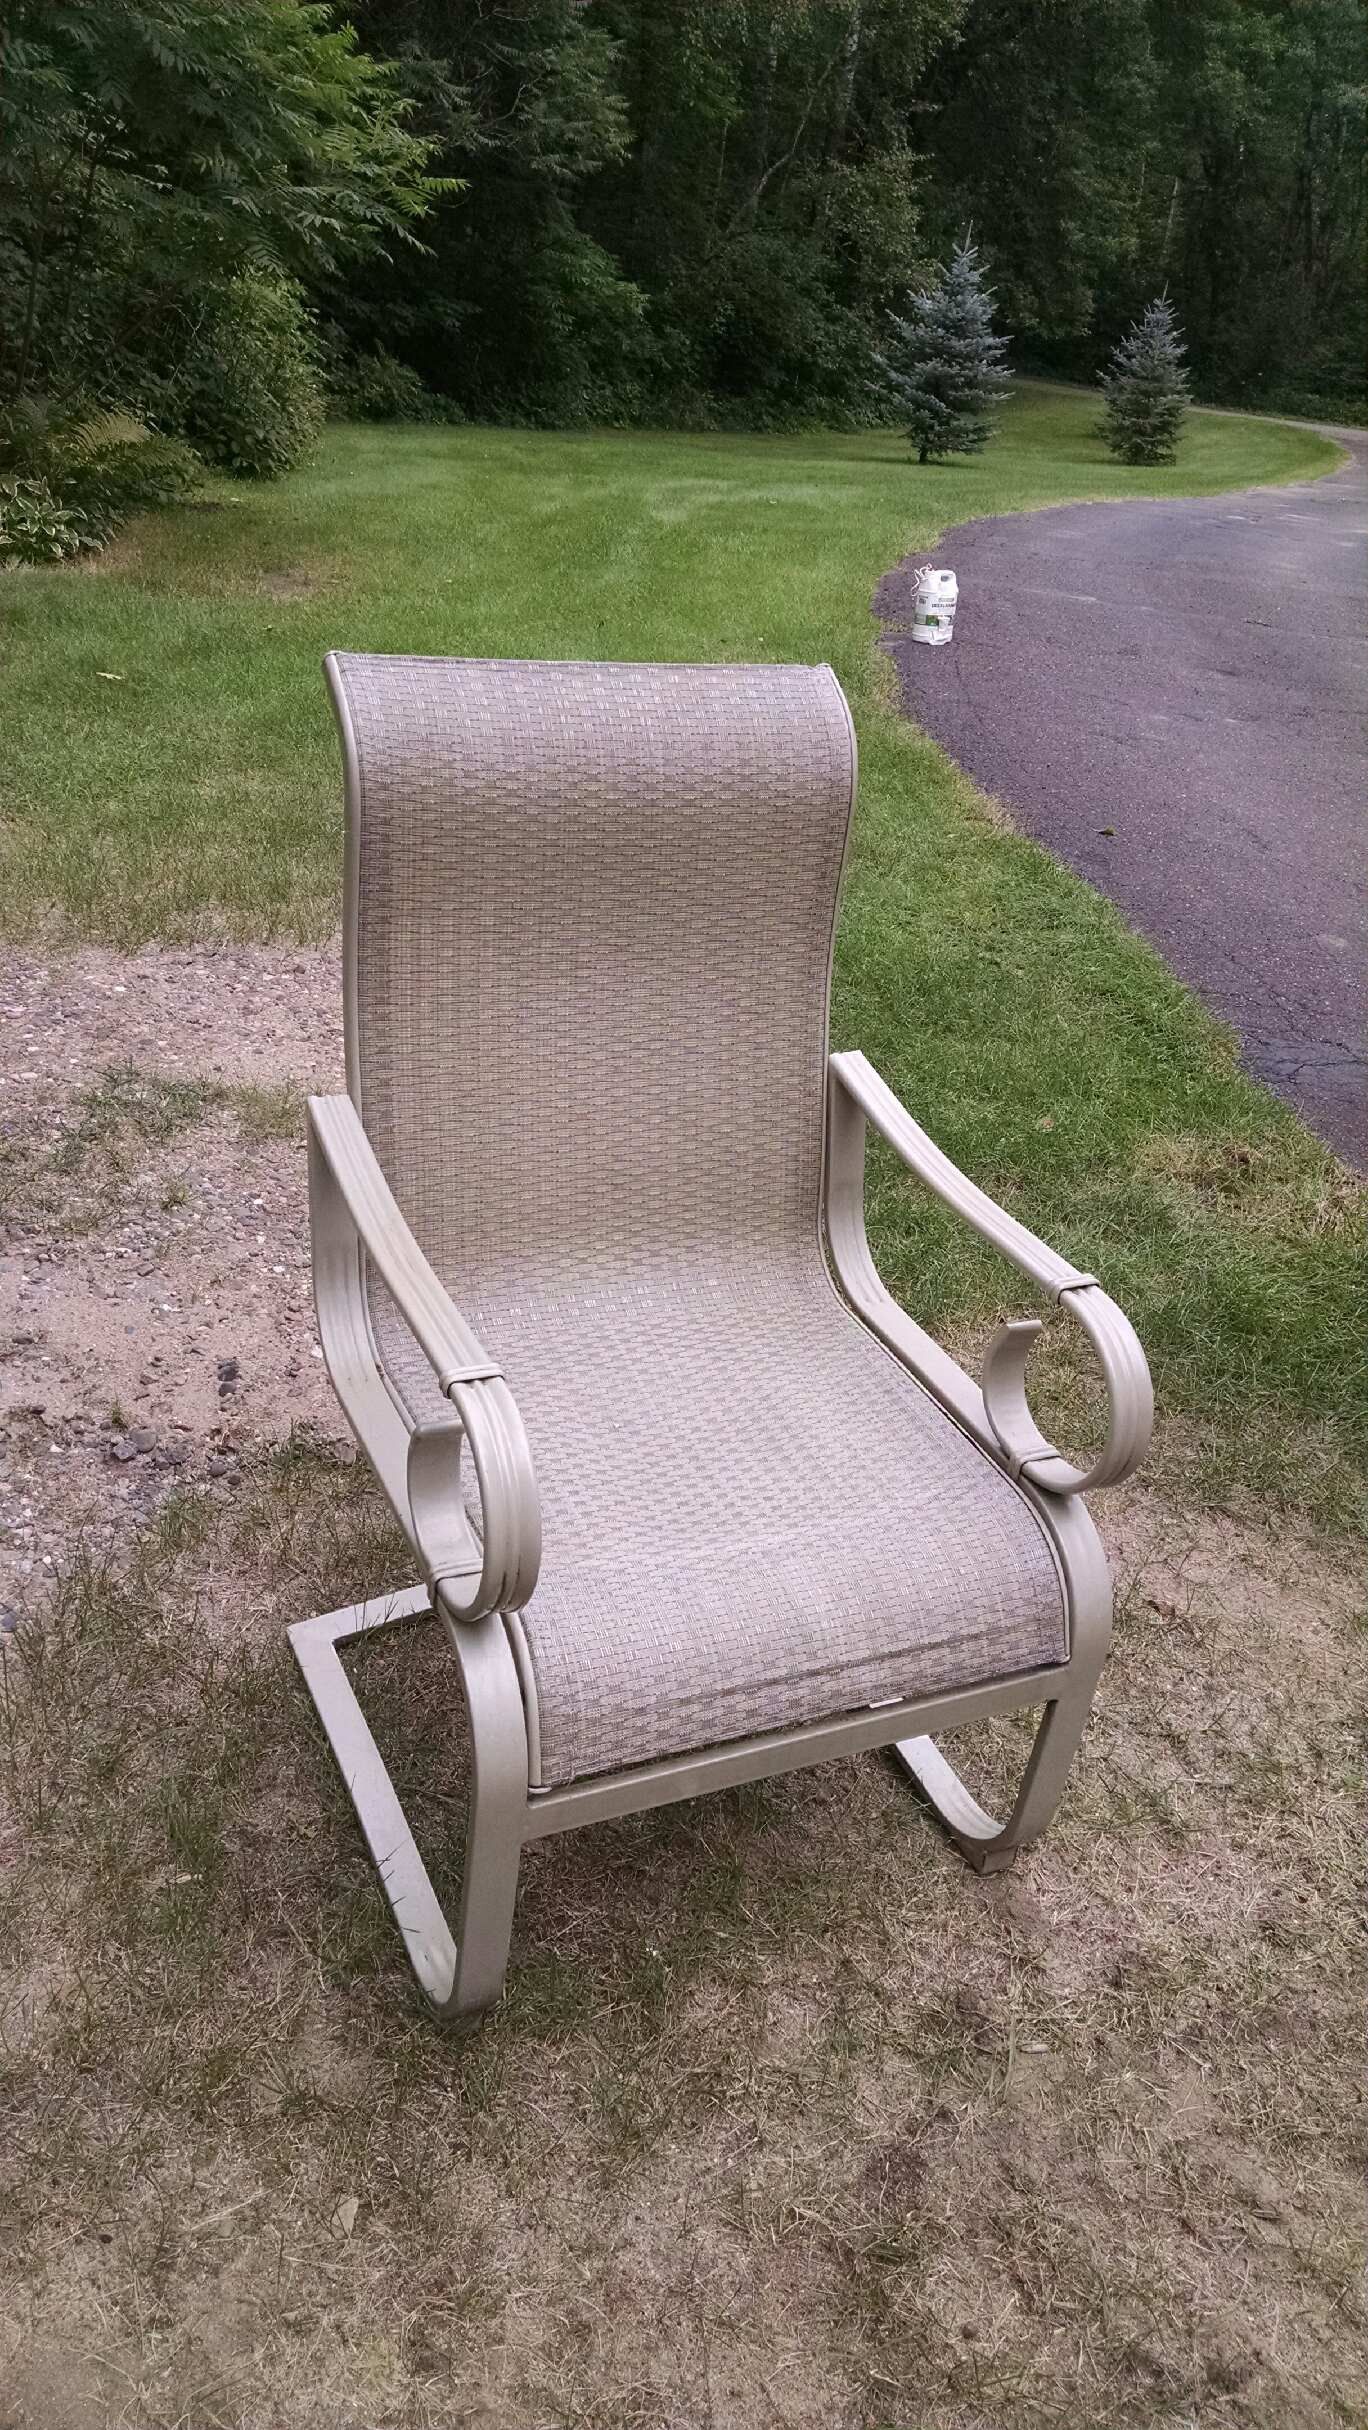 Outdoor patio chairs reduced to $90